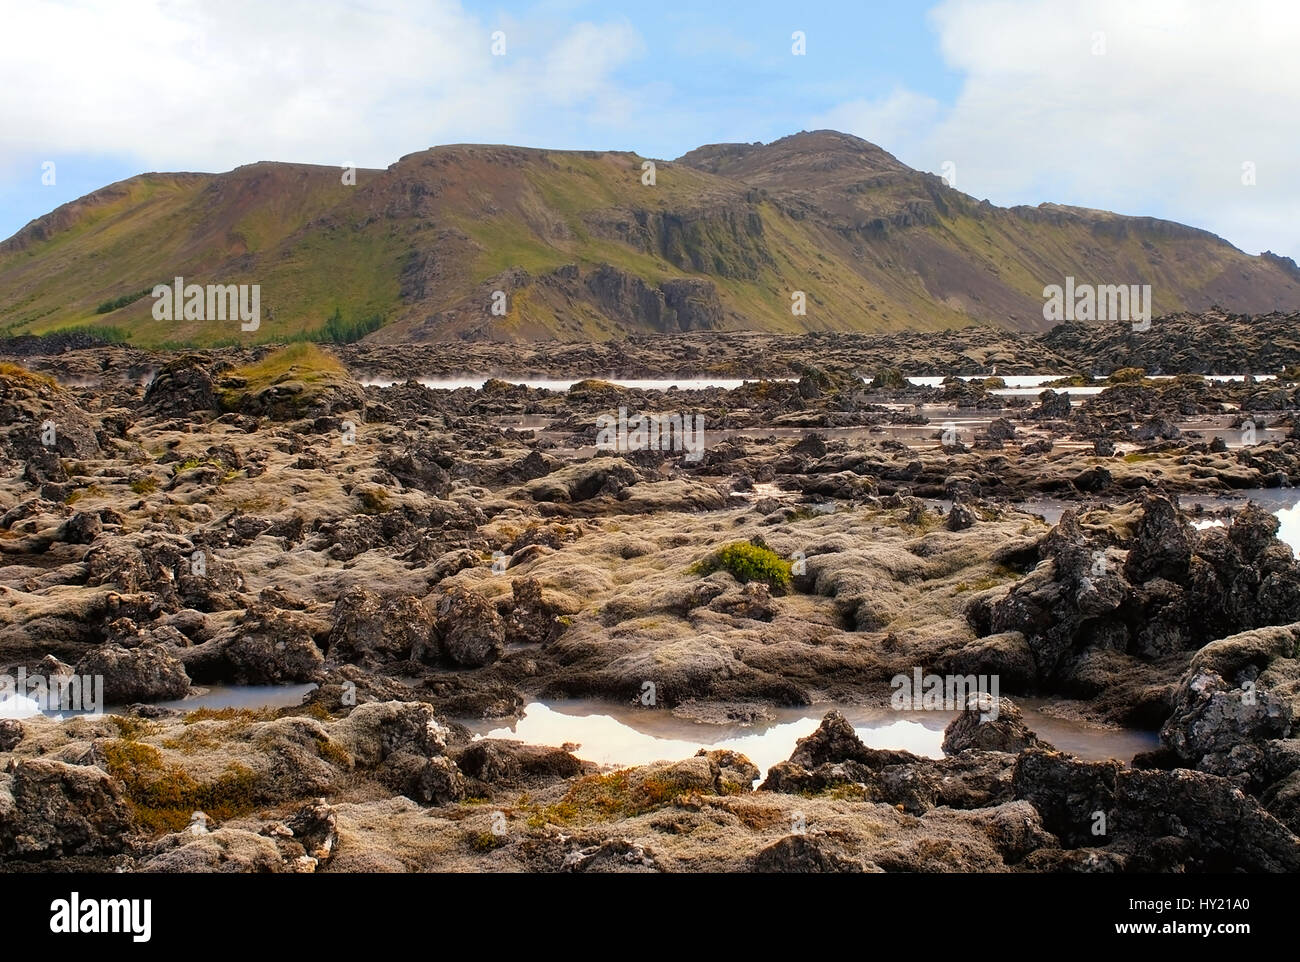 Stock Photo of a volcano landscape at the turquoise colored Blue Lagoon Hot Springs in Iceland. Stock Photo